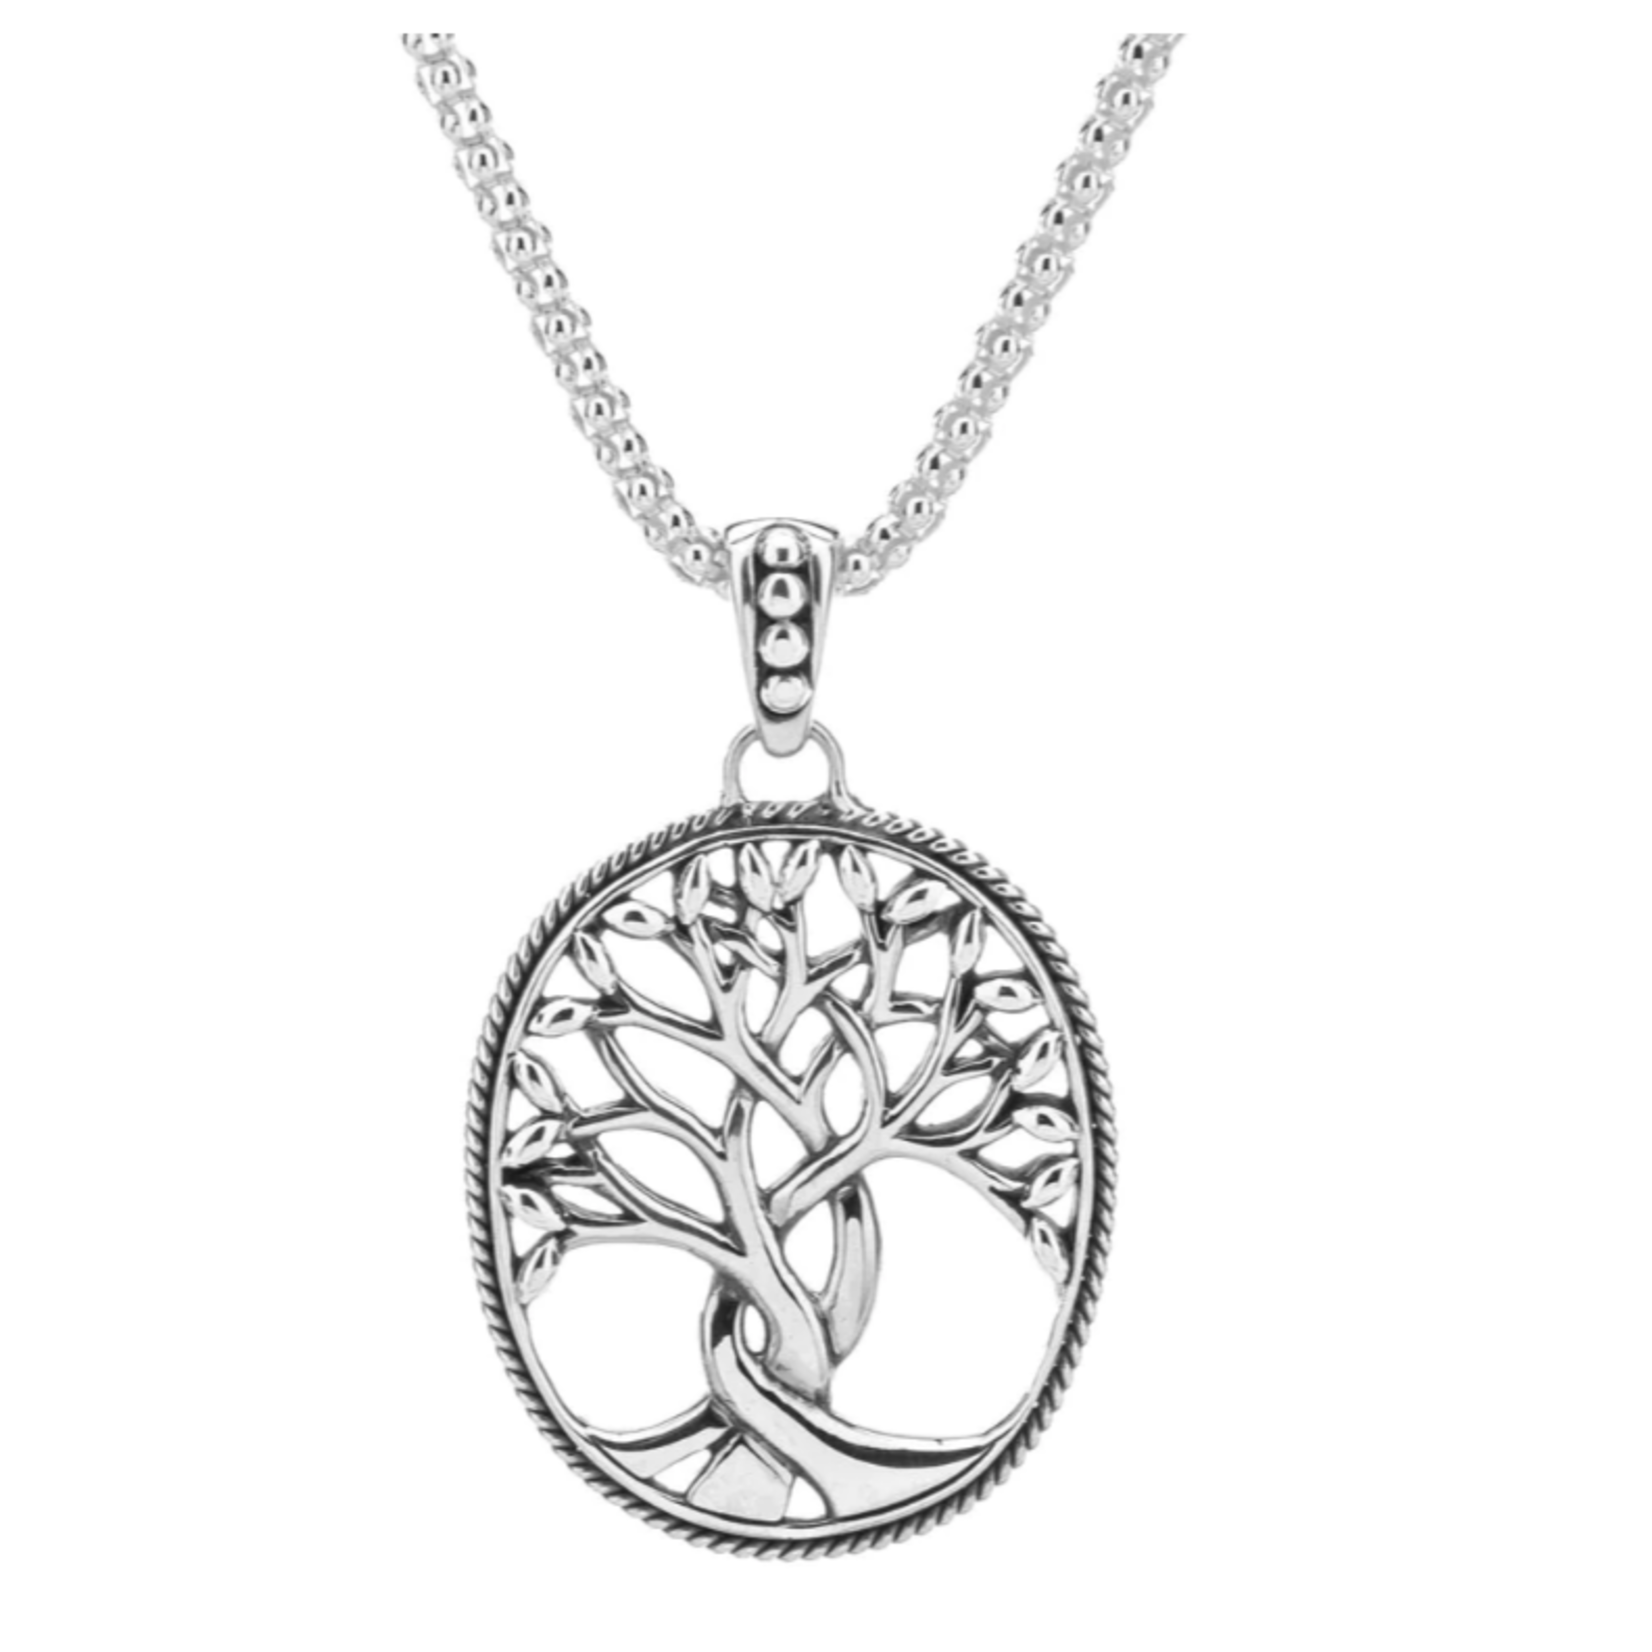 Keith Jack Silver Tree of Life Necklace